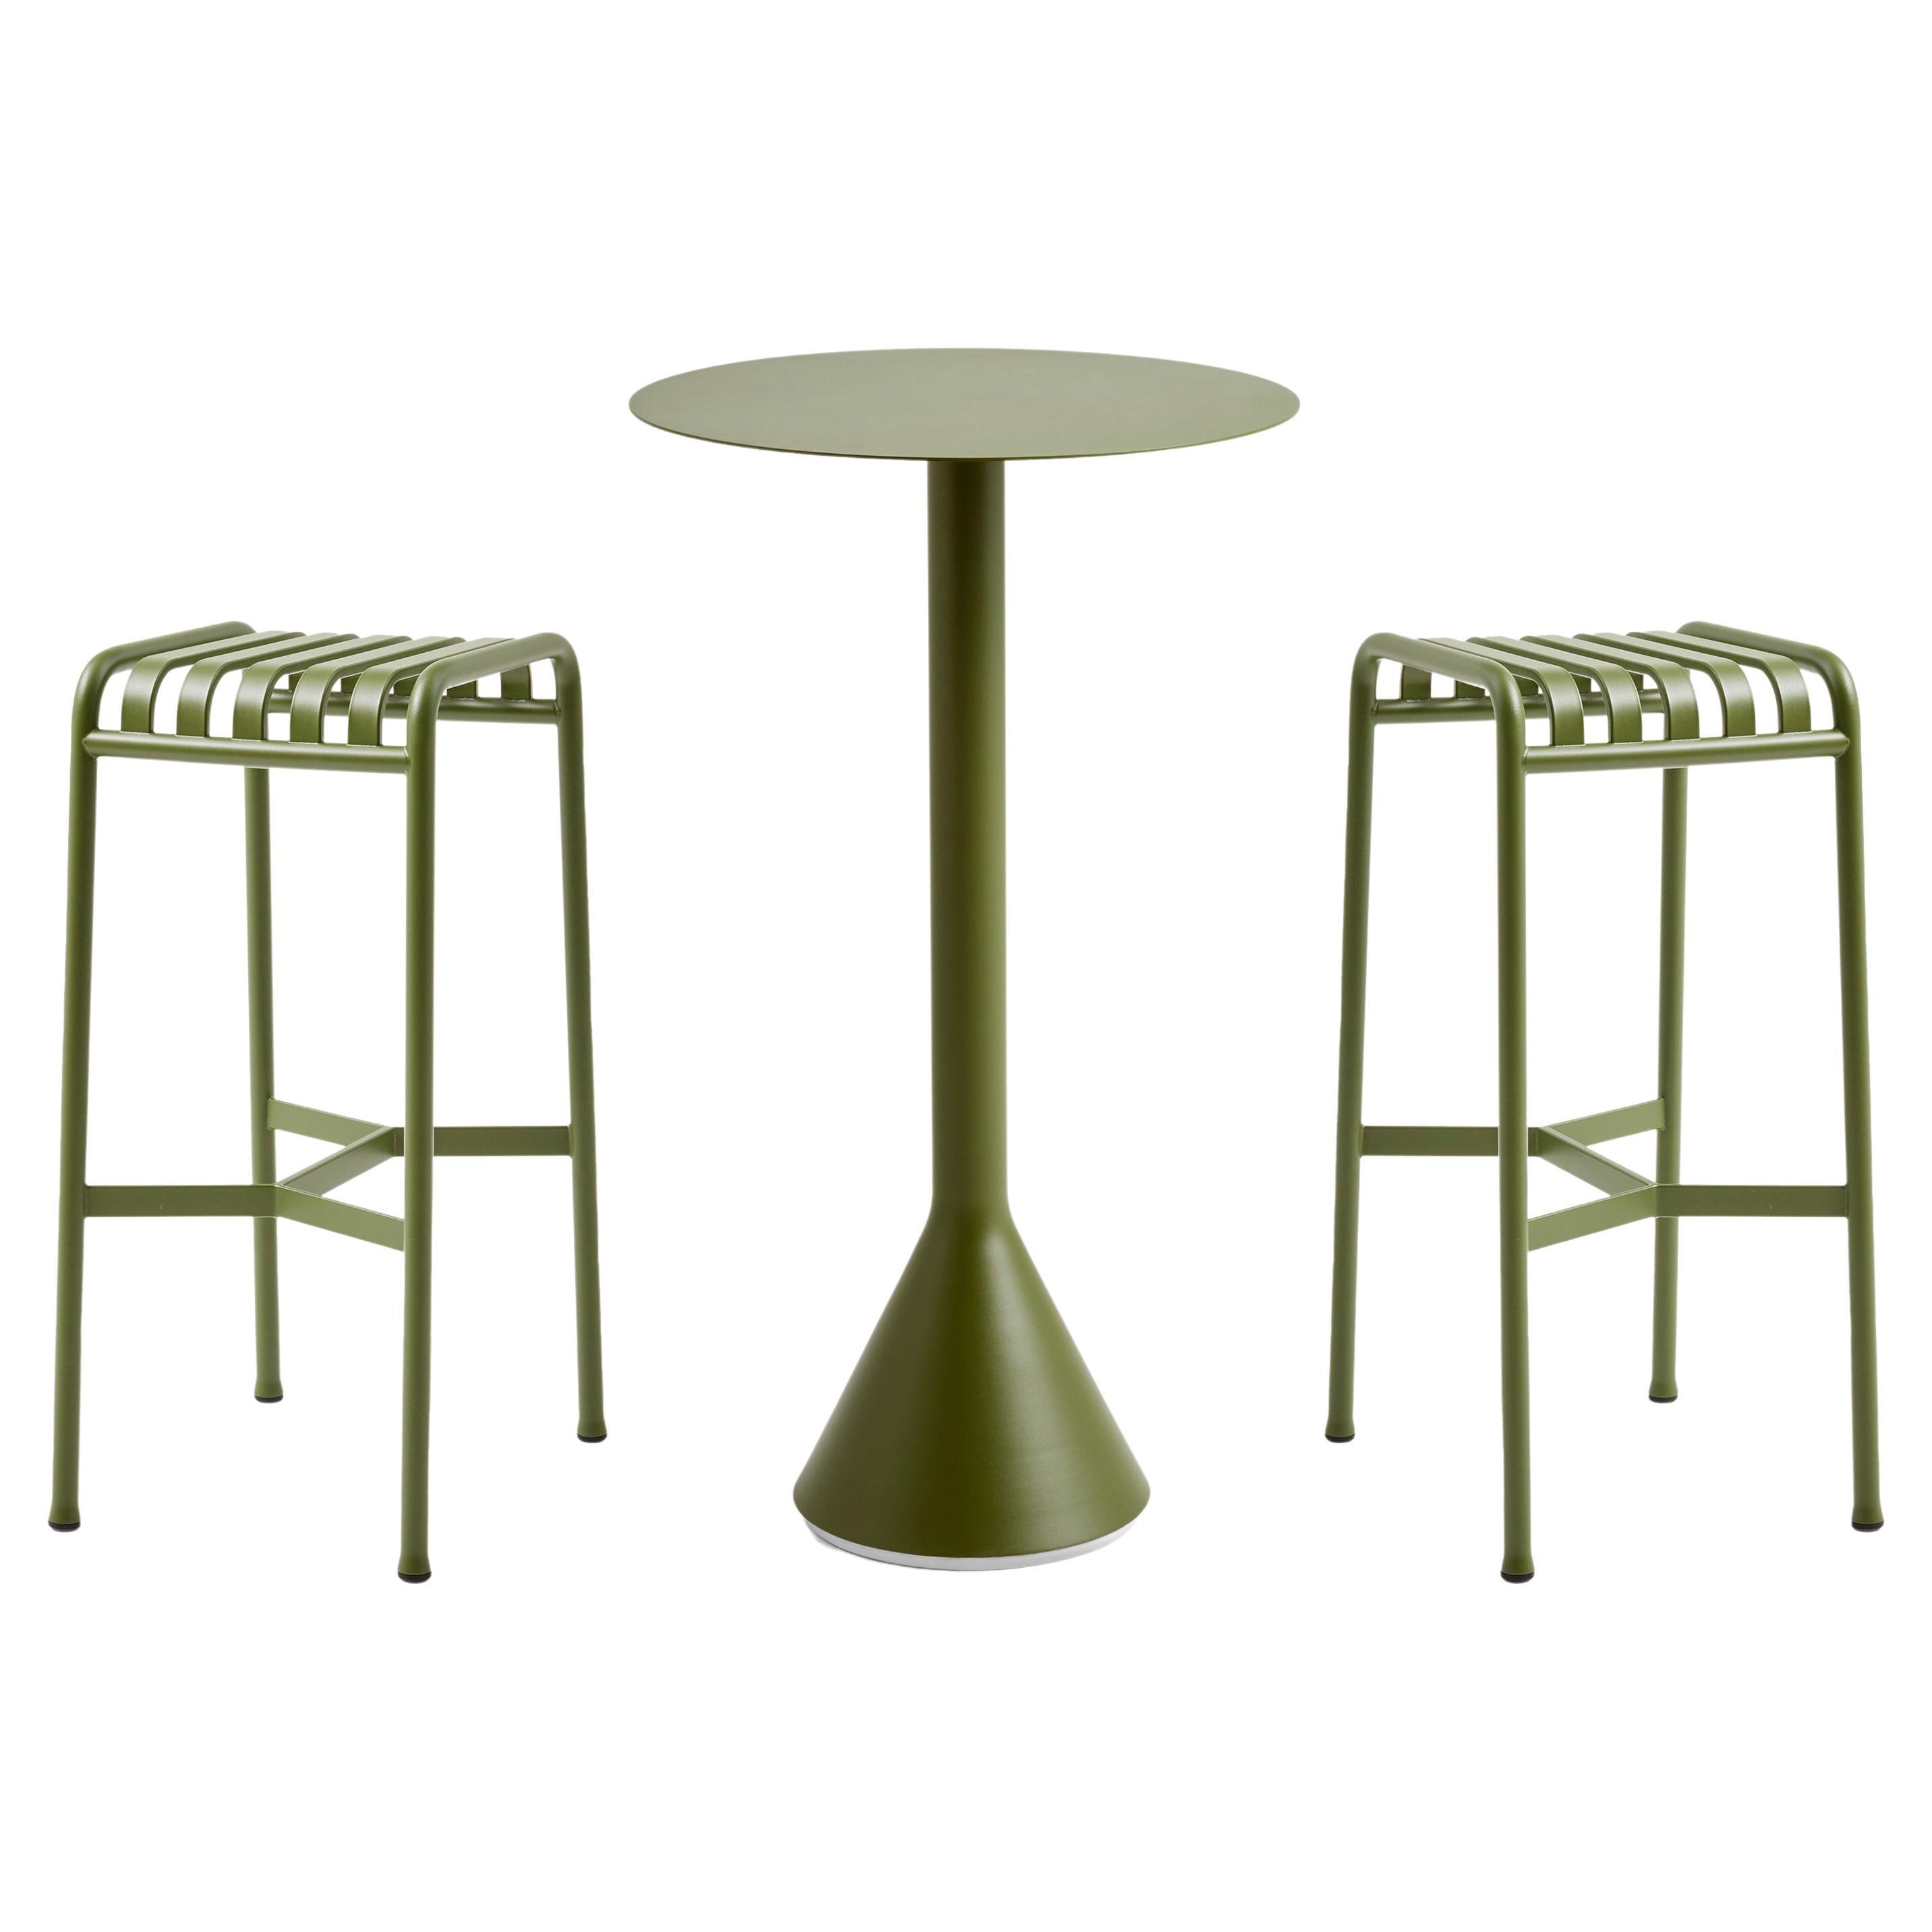 Set of Palissade Cone Table & Bar Stools-olive-by Ronan/Erwan Bouroullec for Hay